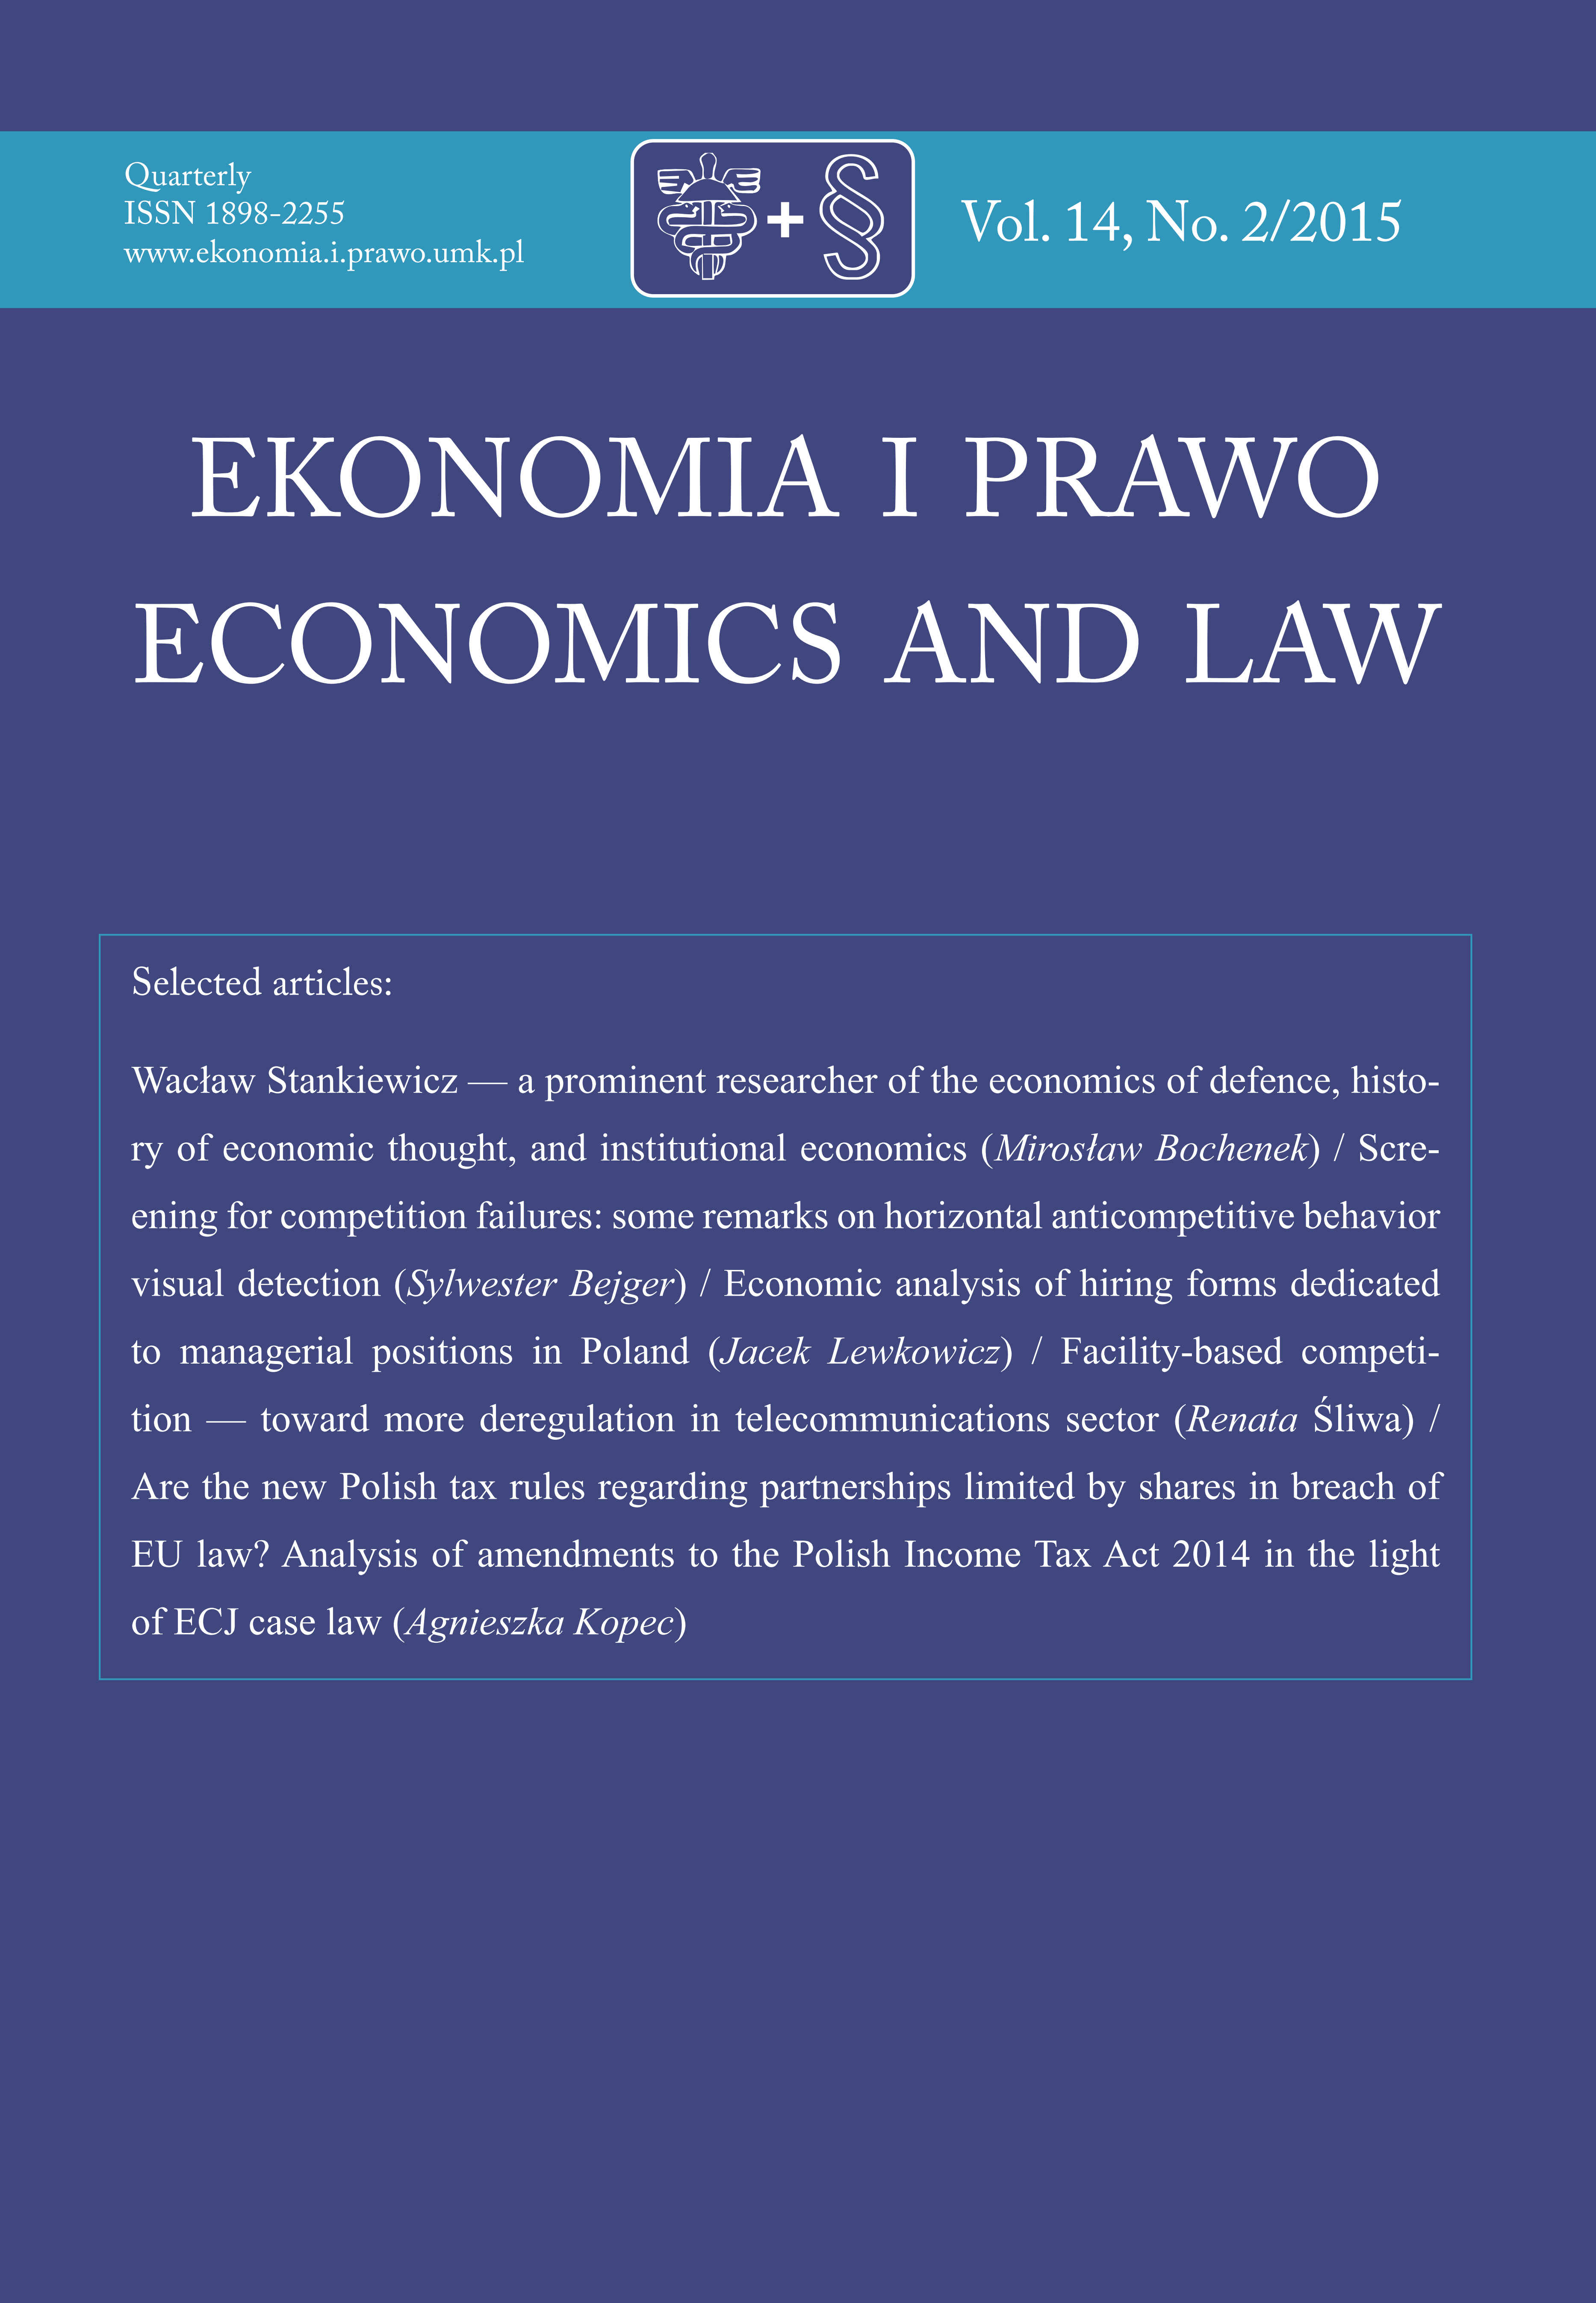 ARE THE NEW POLISH TAX RULES REGARDING PARTNERSHIPS LIMITED BY SHARES IN BREACH OF EU LAW? ANALYSIS OF AMENDMENTS TO THE POLISH INCOME TAX ACT 2014 IN THE LIGHT OF ECJ CASE LAW